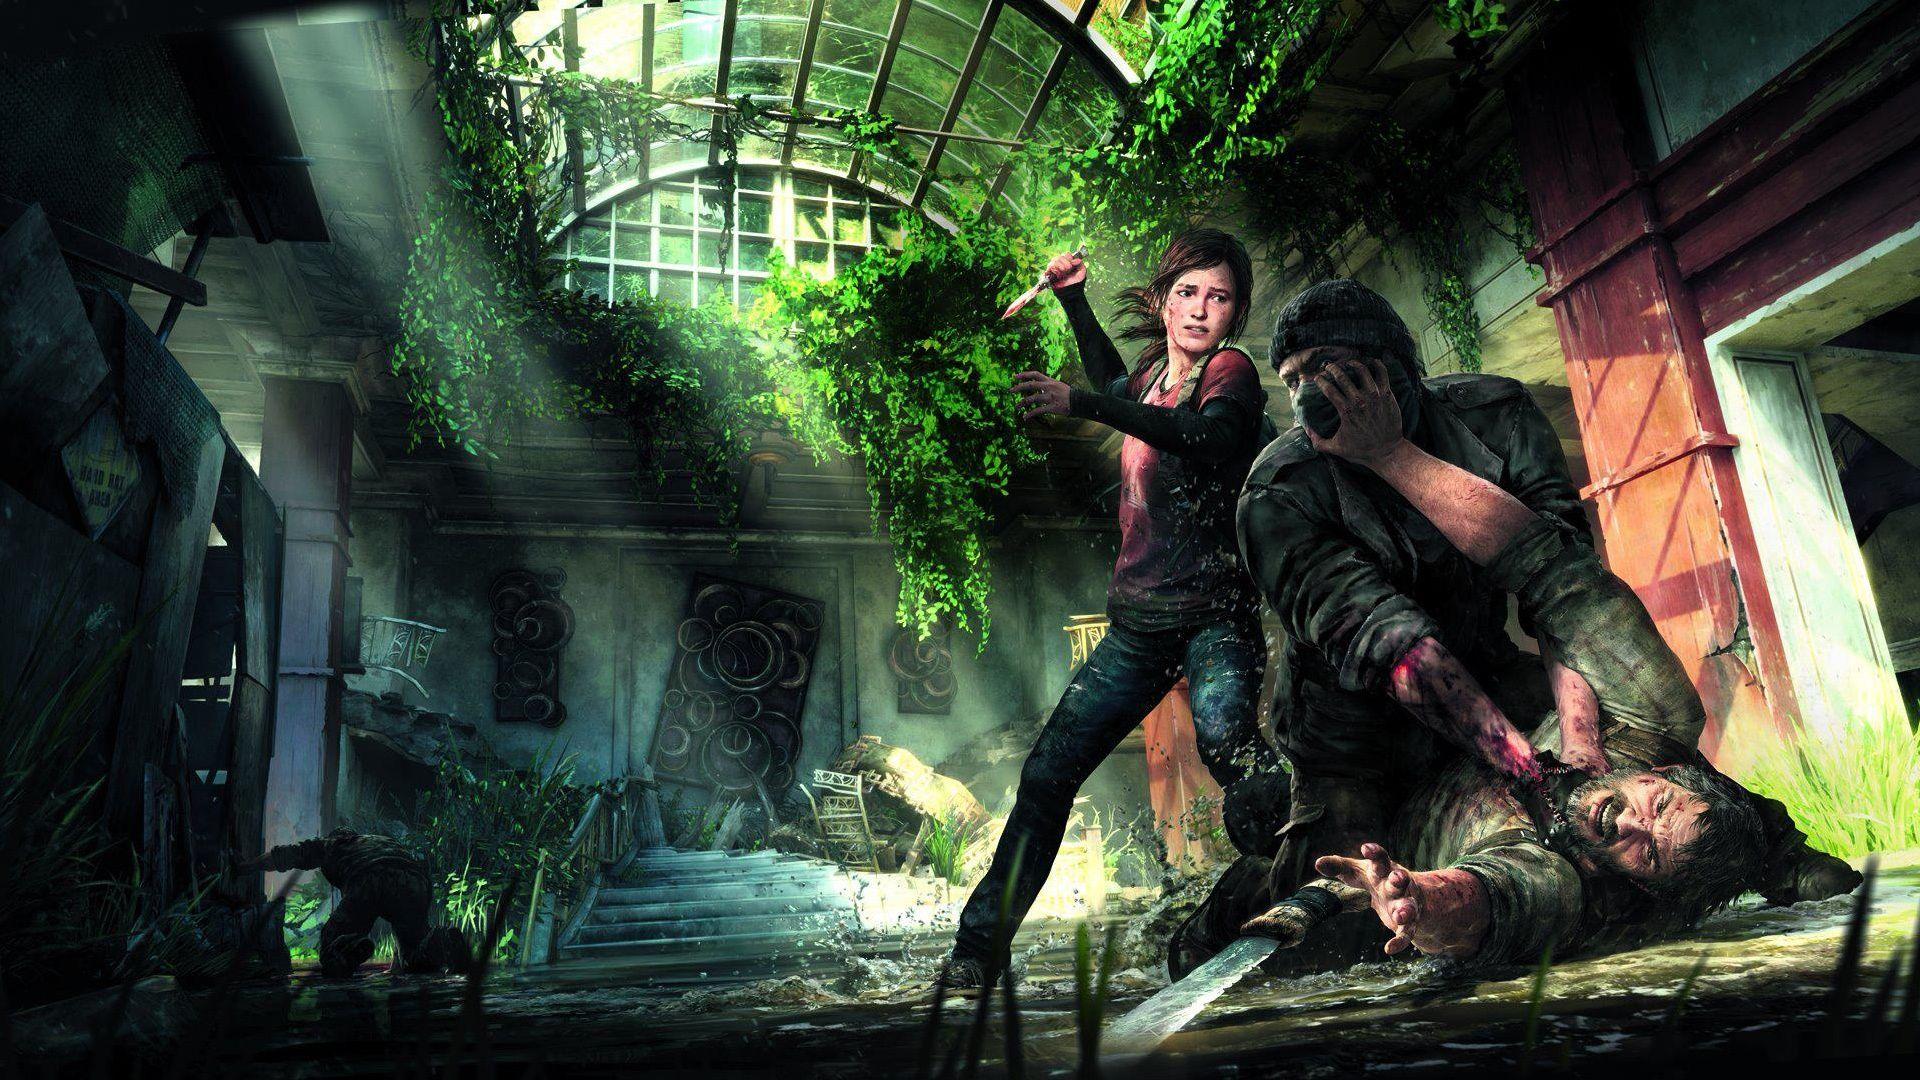 The Last Of Us PS3 Game Wallpaper 1920x1080 HD Wallpaper Games